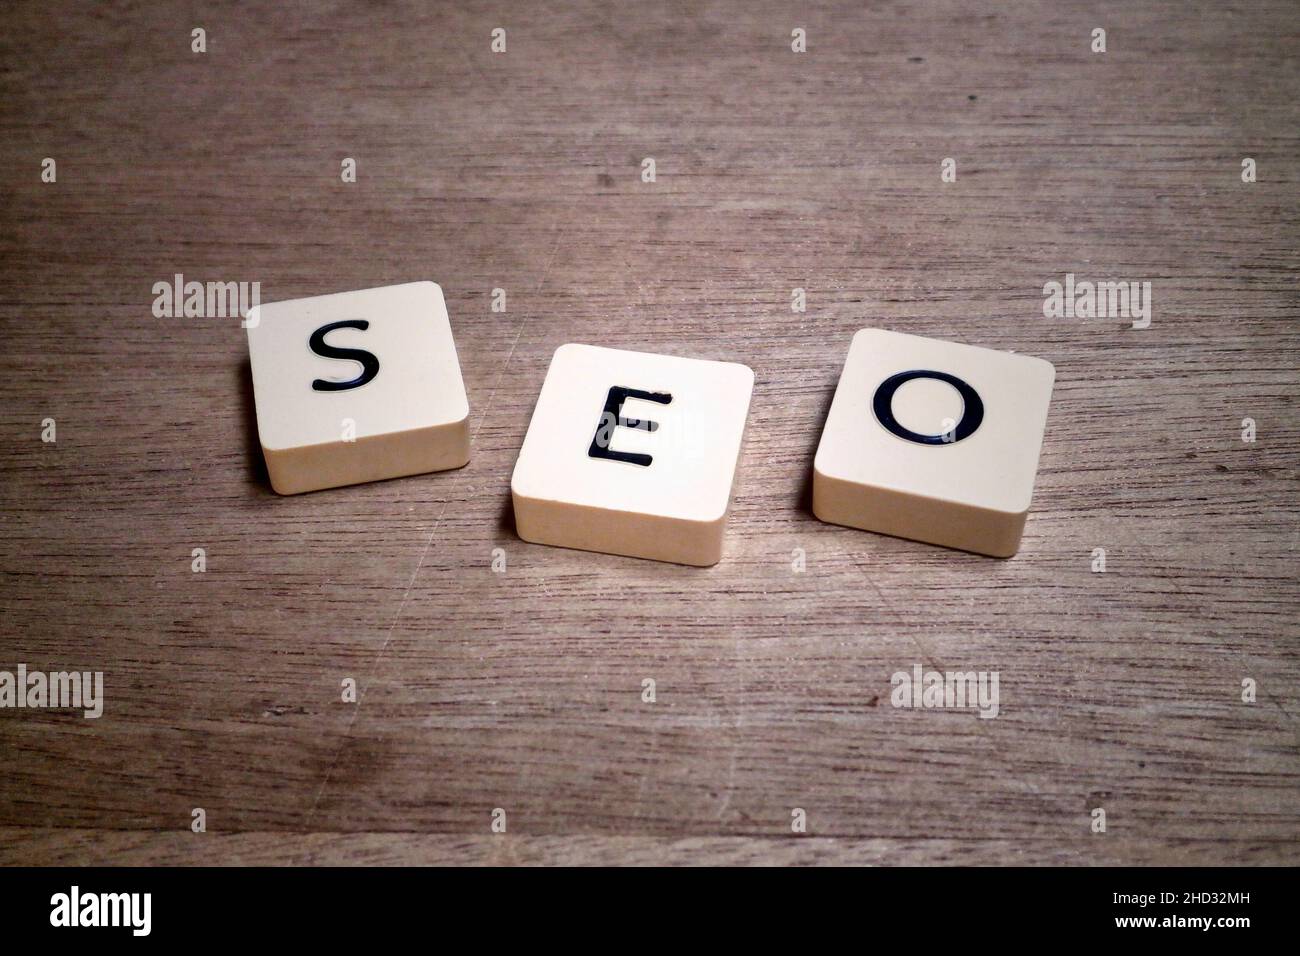 Lettered plastic tiles on a wooden board displaying the acronym SEO. Stock Photo